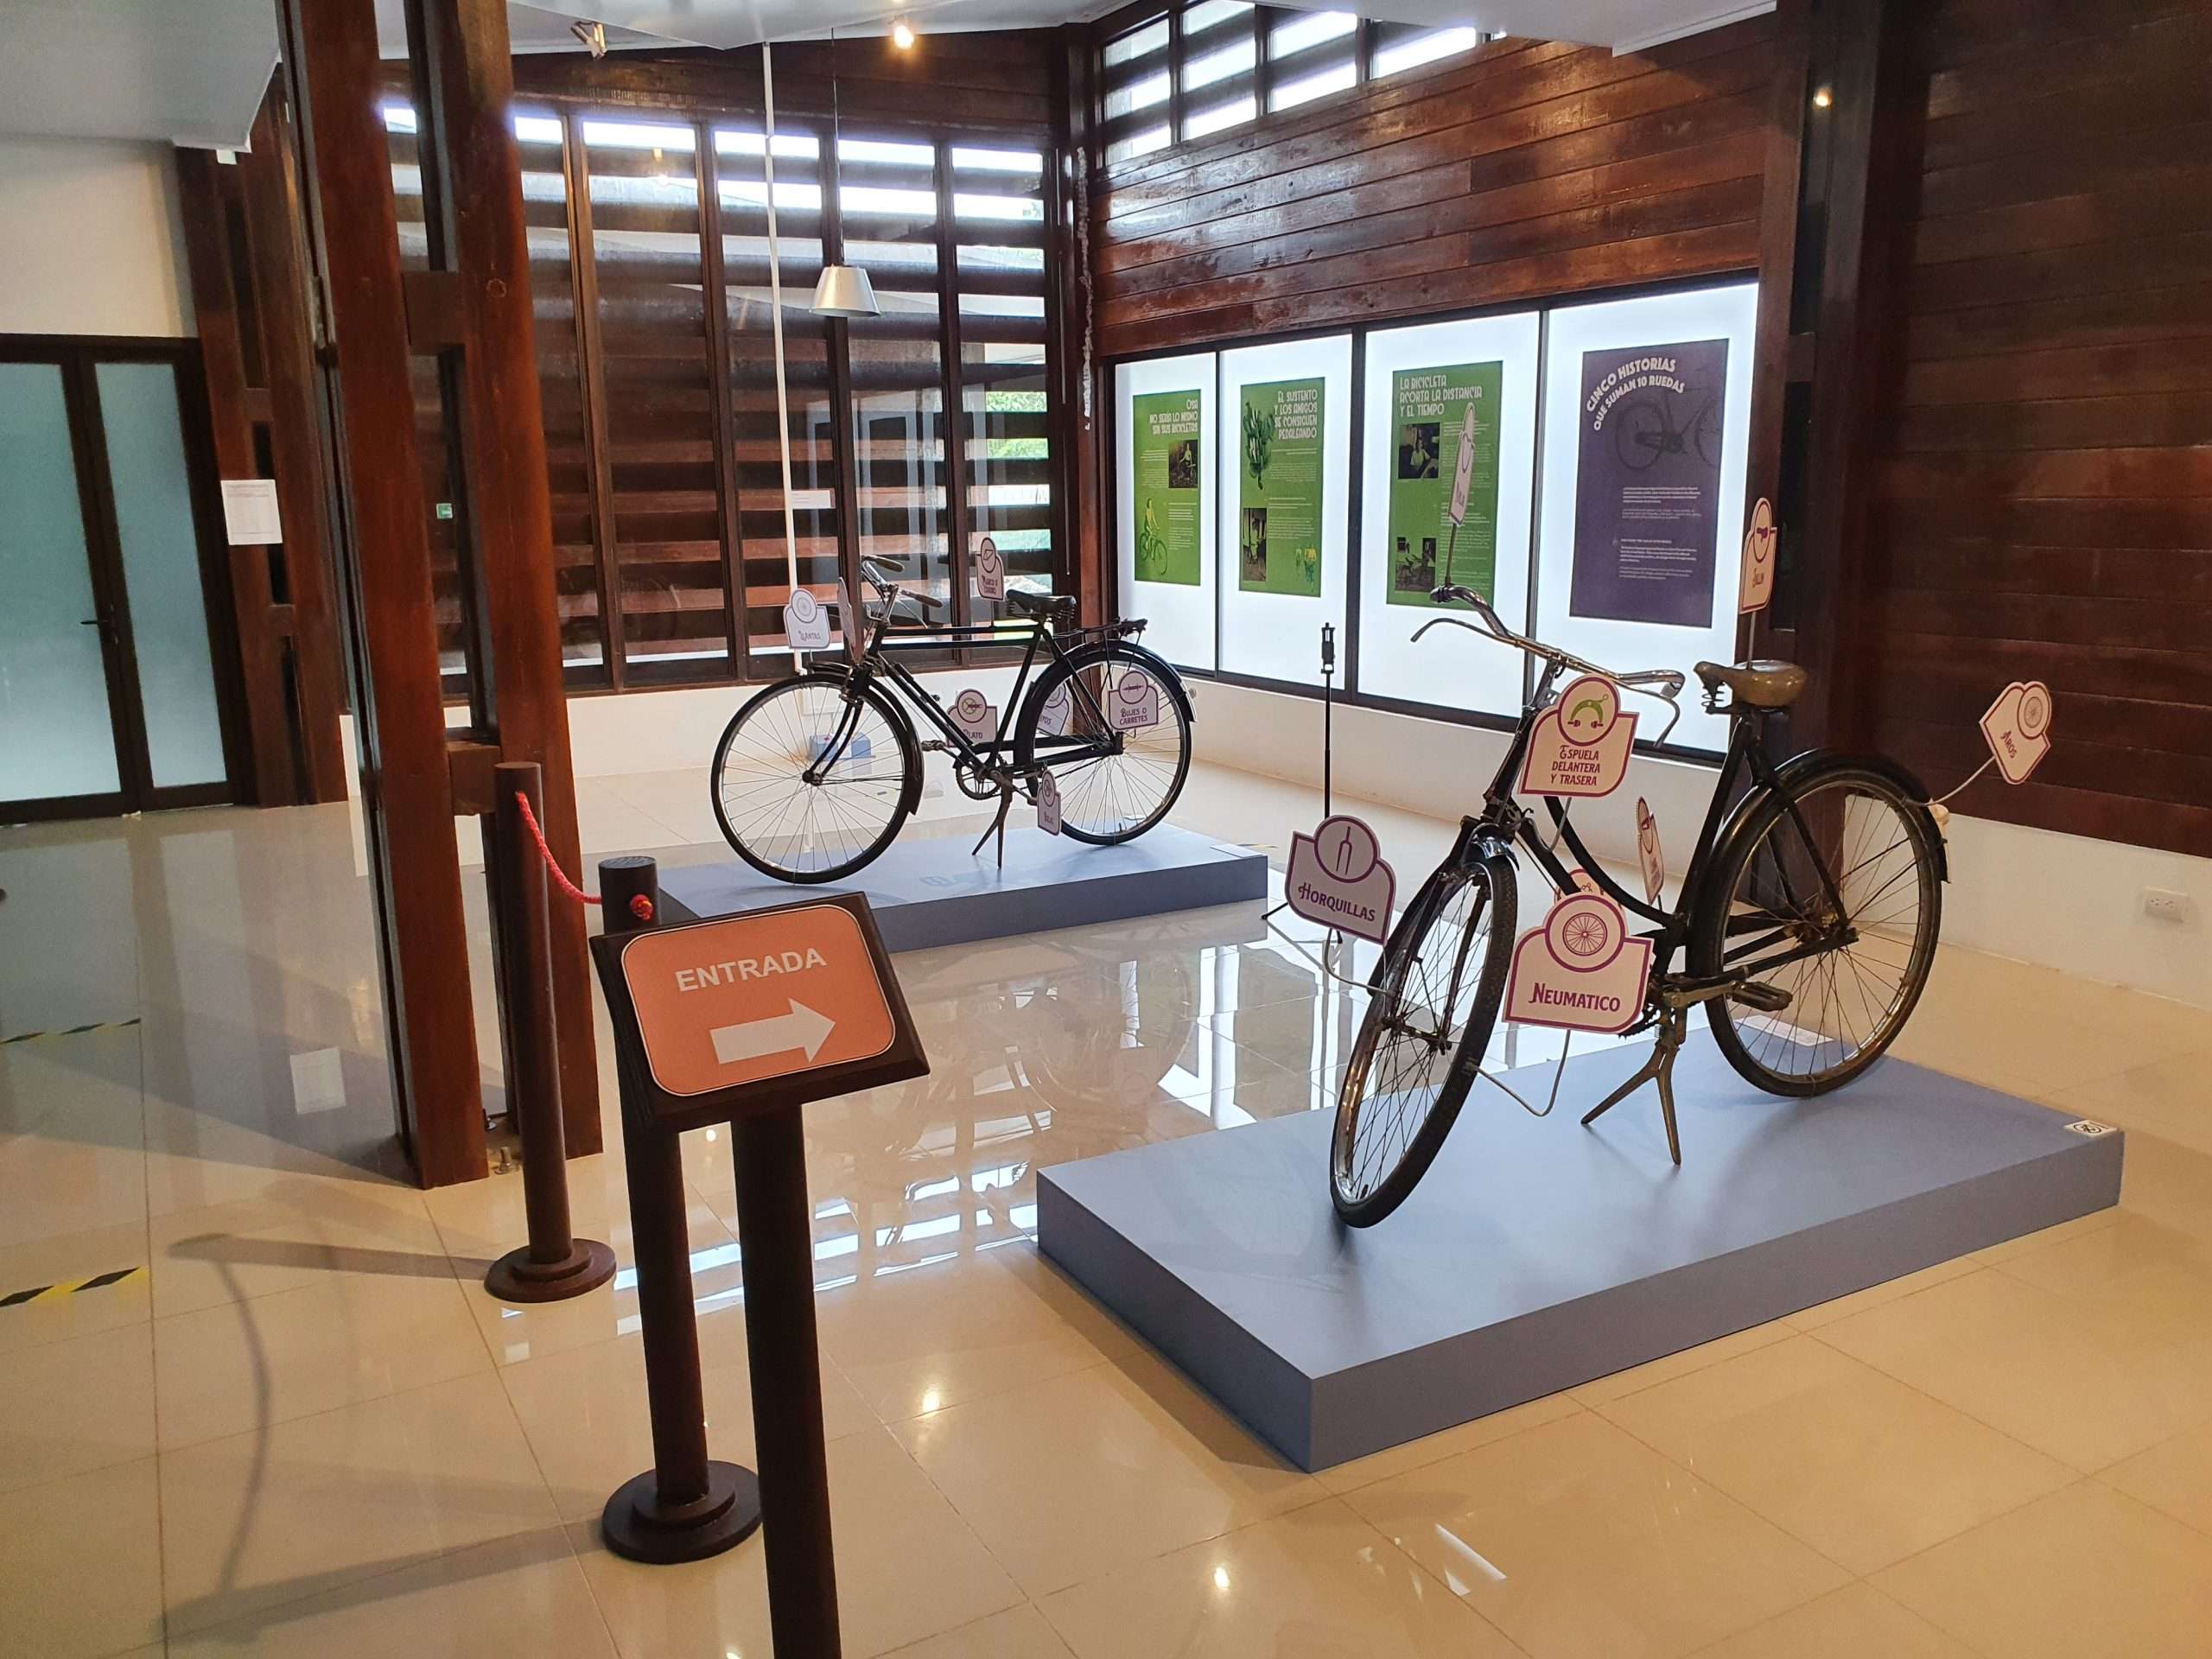 In Osa the history travels by bicycle